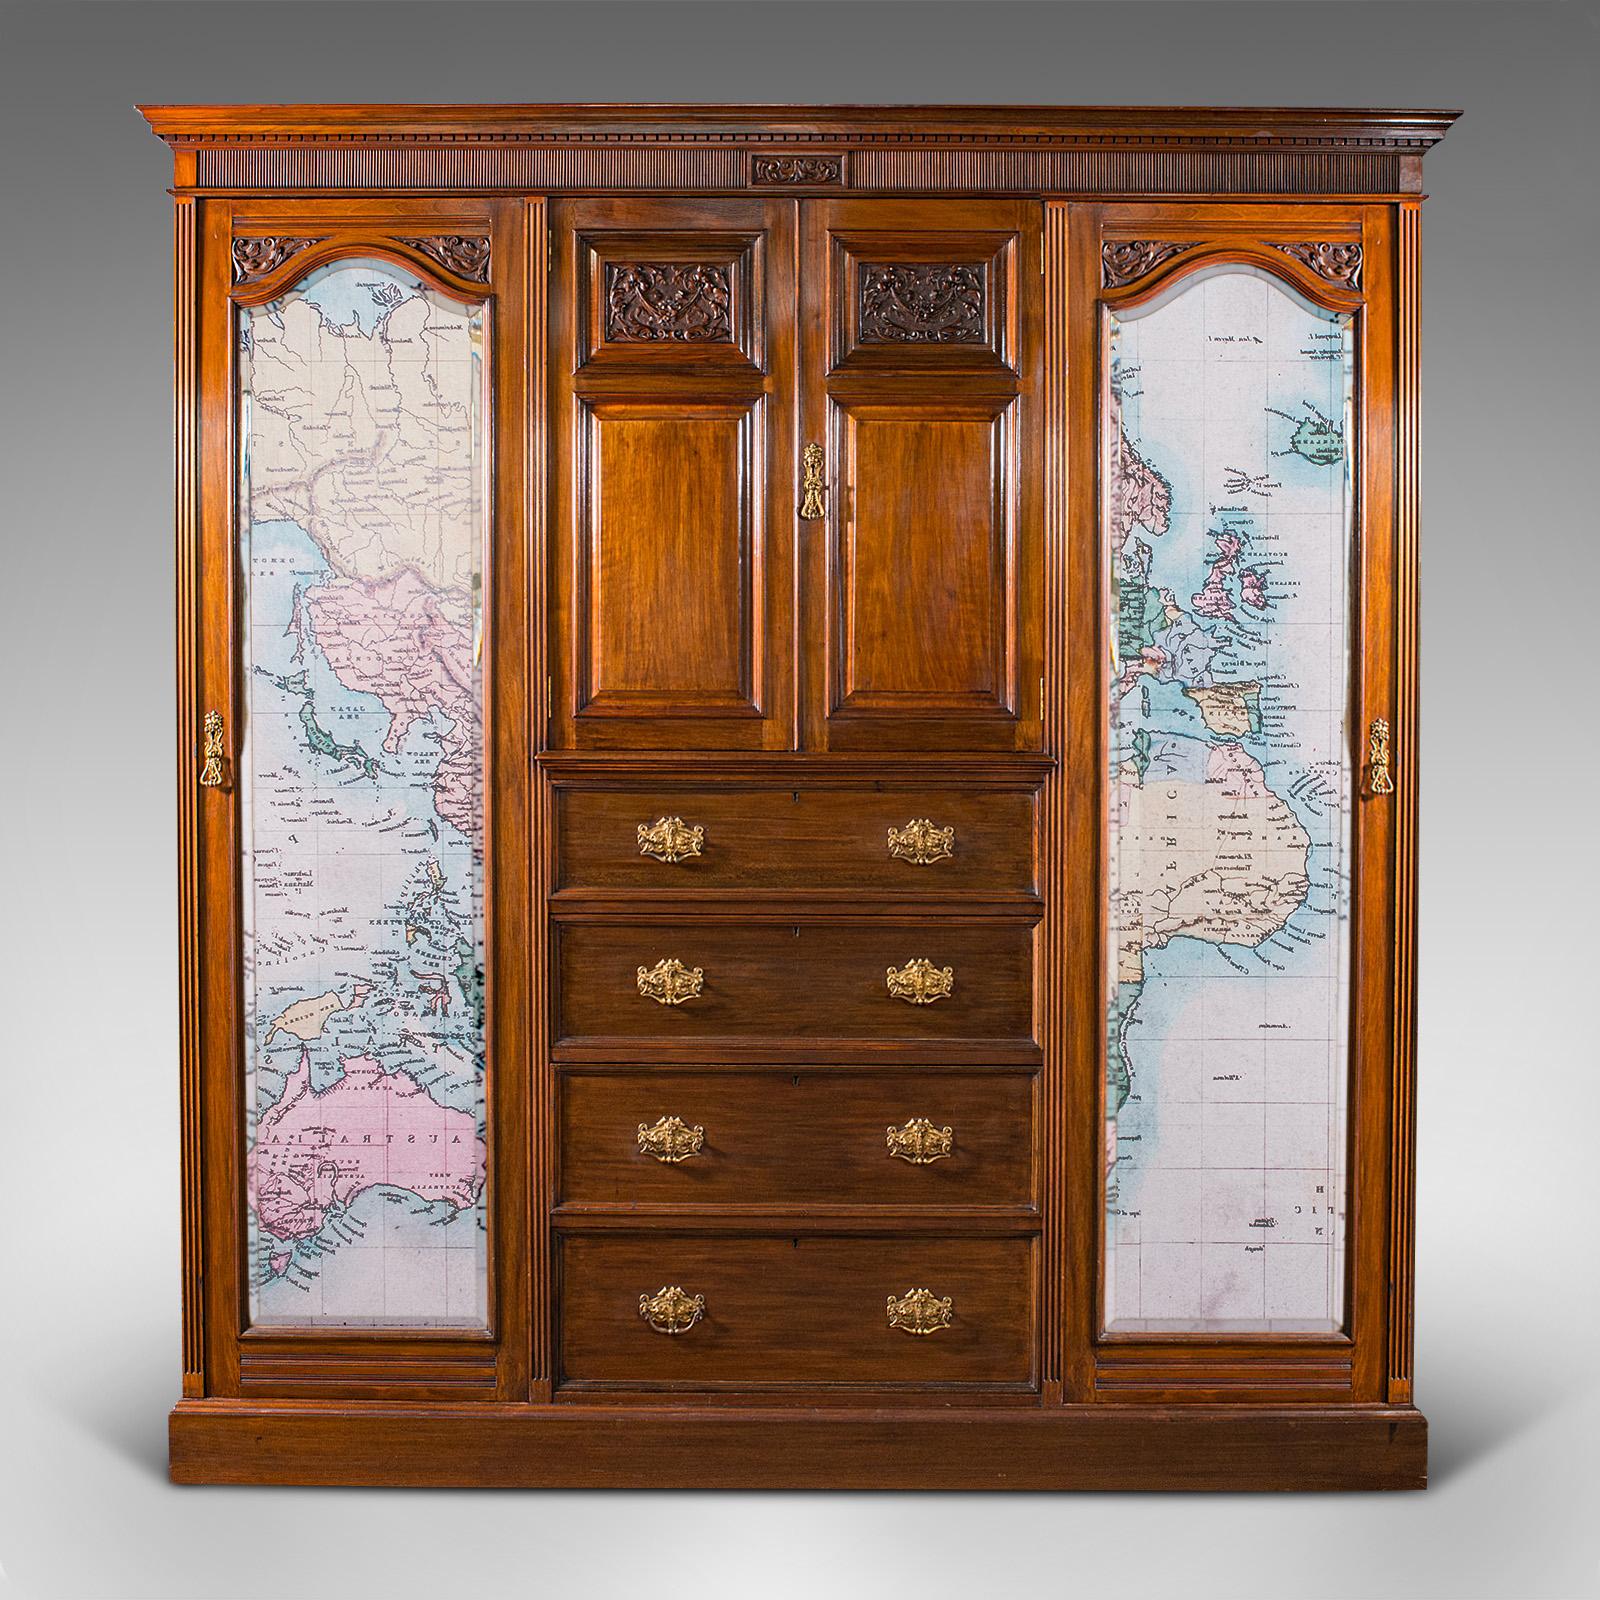 This is an antique gentleman's wardrobe. An English, walnut compactum cupboard by Waring & Gillow, dating to the late Victorian period, circa 1900.

Superior proportion and appearance
Displays a desirable aged patina and in good order
Select